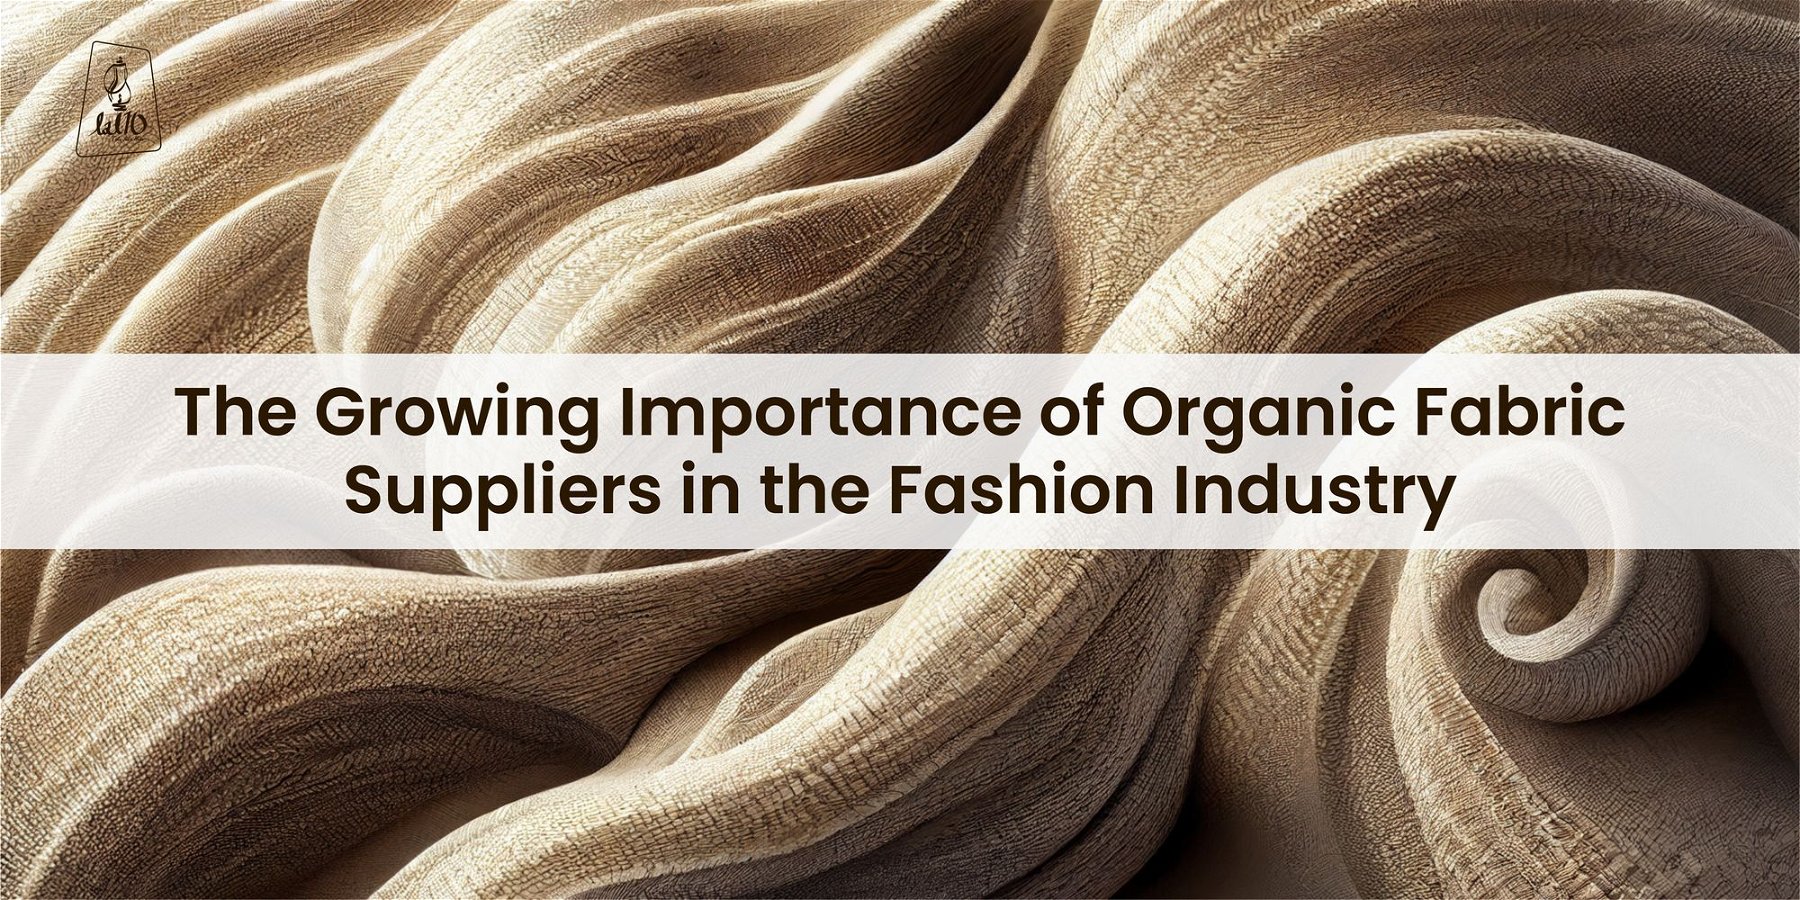 The Growing Importance of Organic Fabric Suppliers in the Fashion Industry